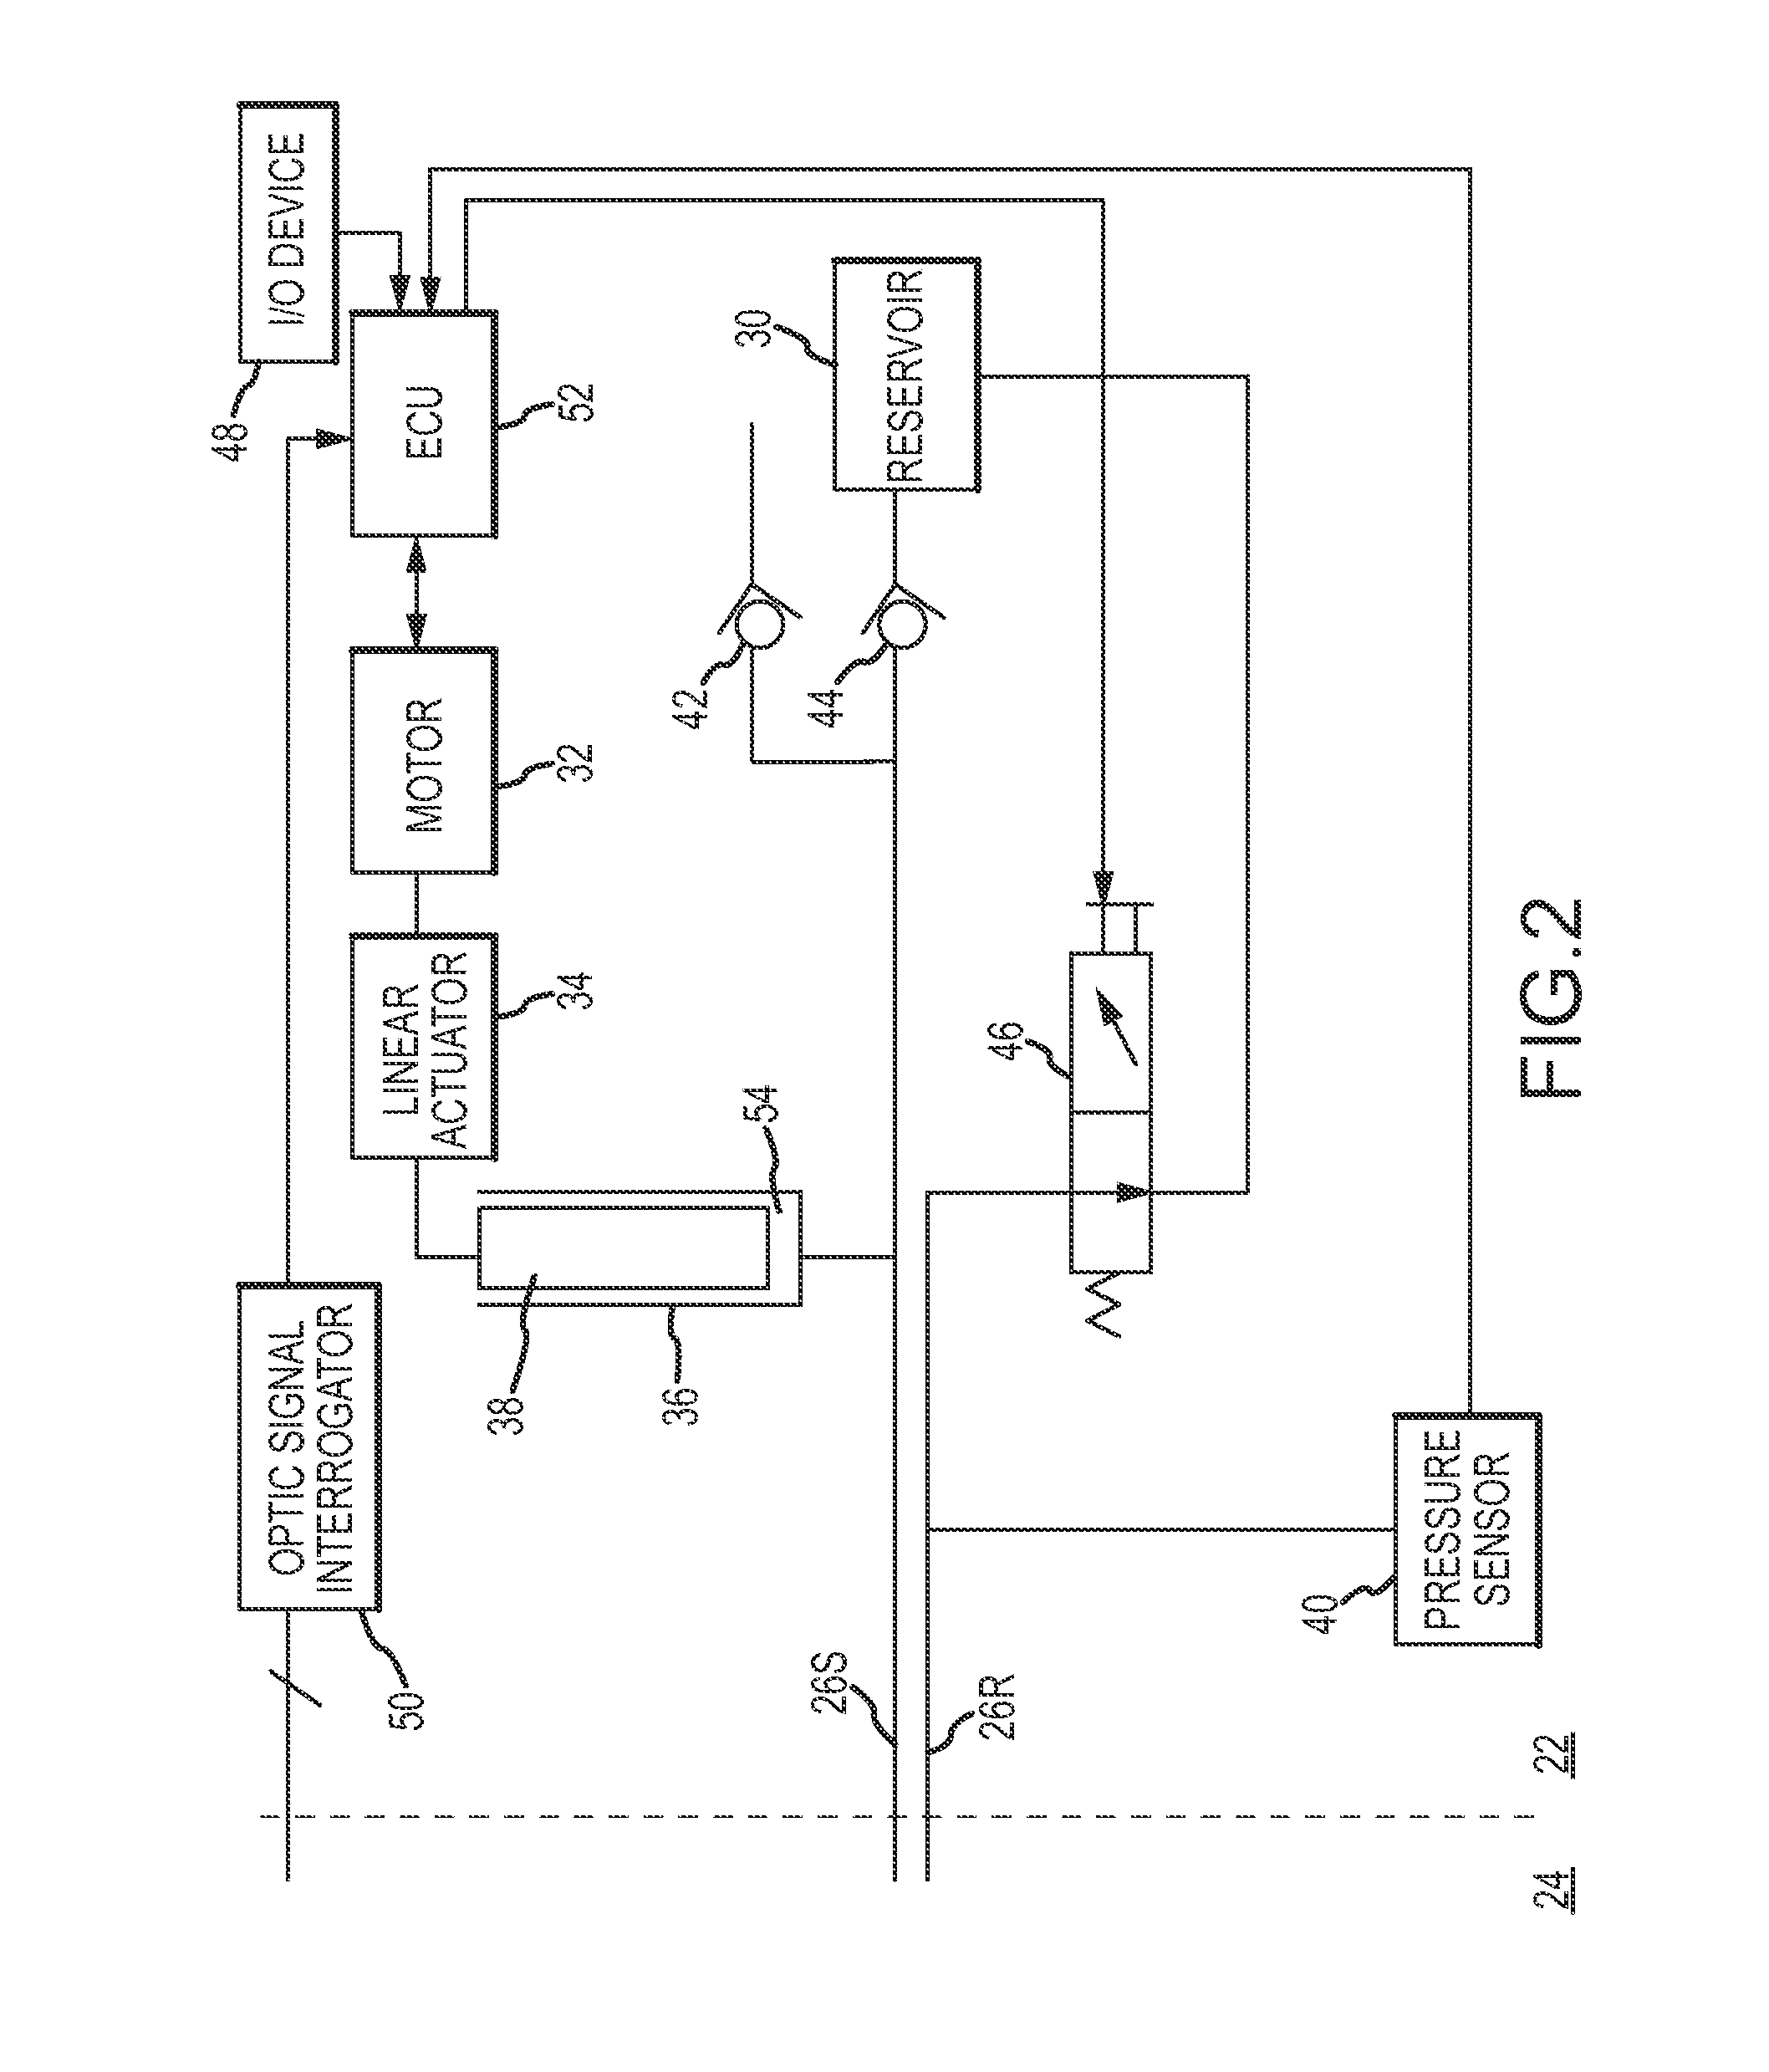 Remote guidance system for medical devices for use in environments having electromagnetic interference